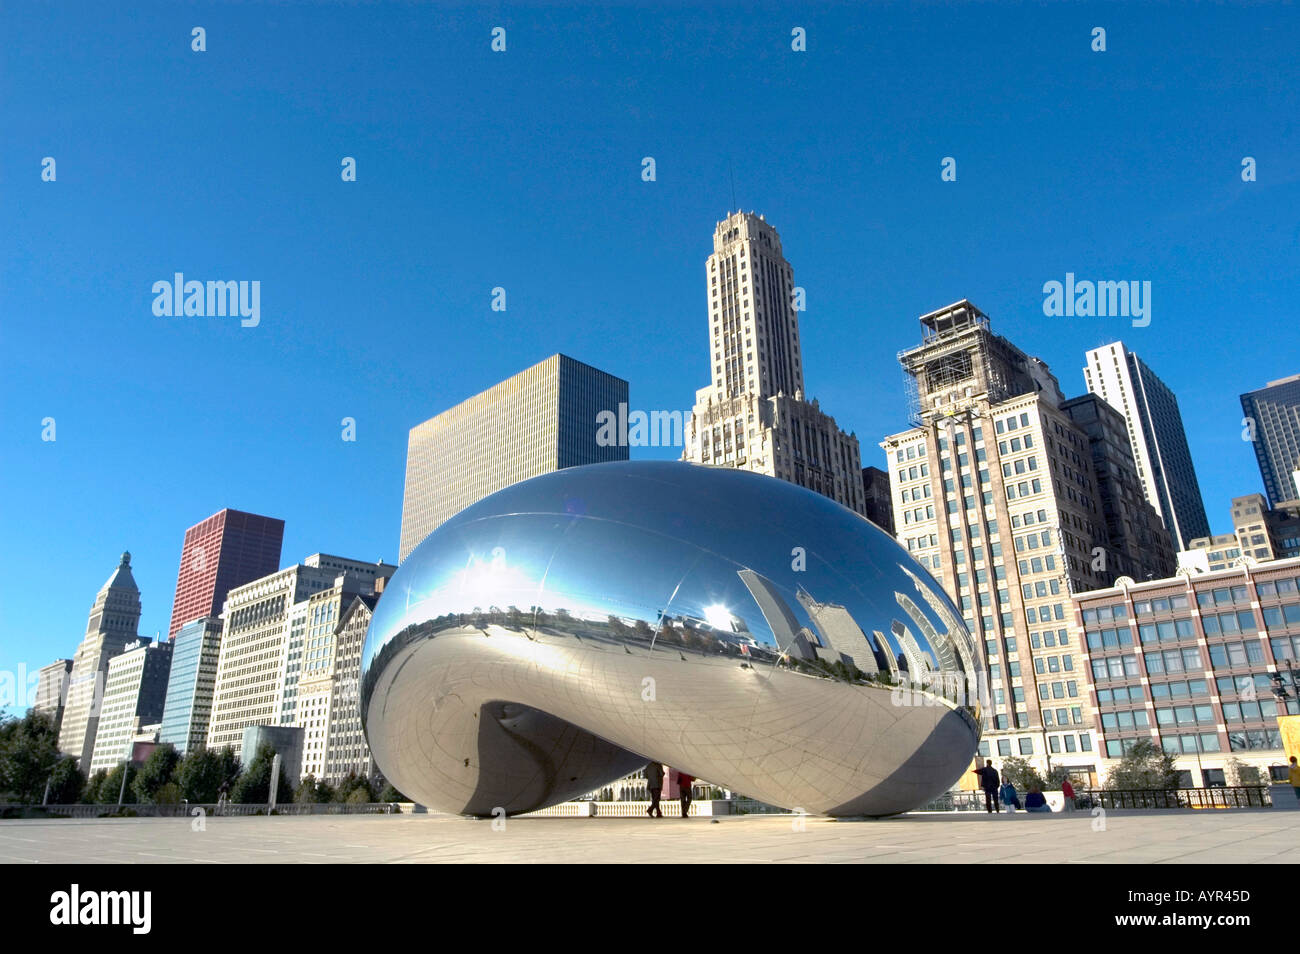 METAL STAINLESS STEEL CHROME BEAN  SCULPTURE WITH SKYSCRAPER SKYLINE  IN BACKGROUND MILLENNIUM PARK CHICAGO UNITED STATES OF A Stock Photo